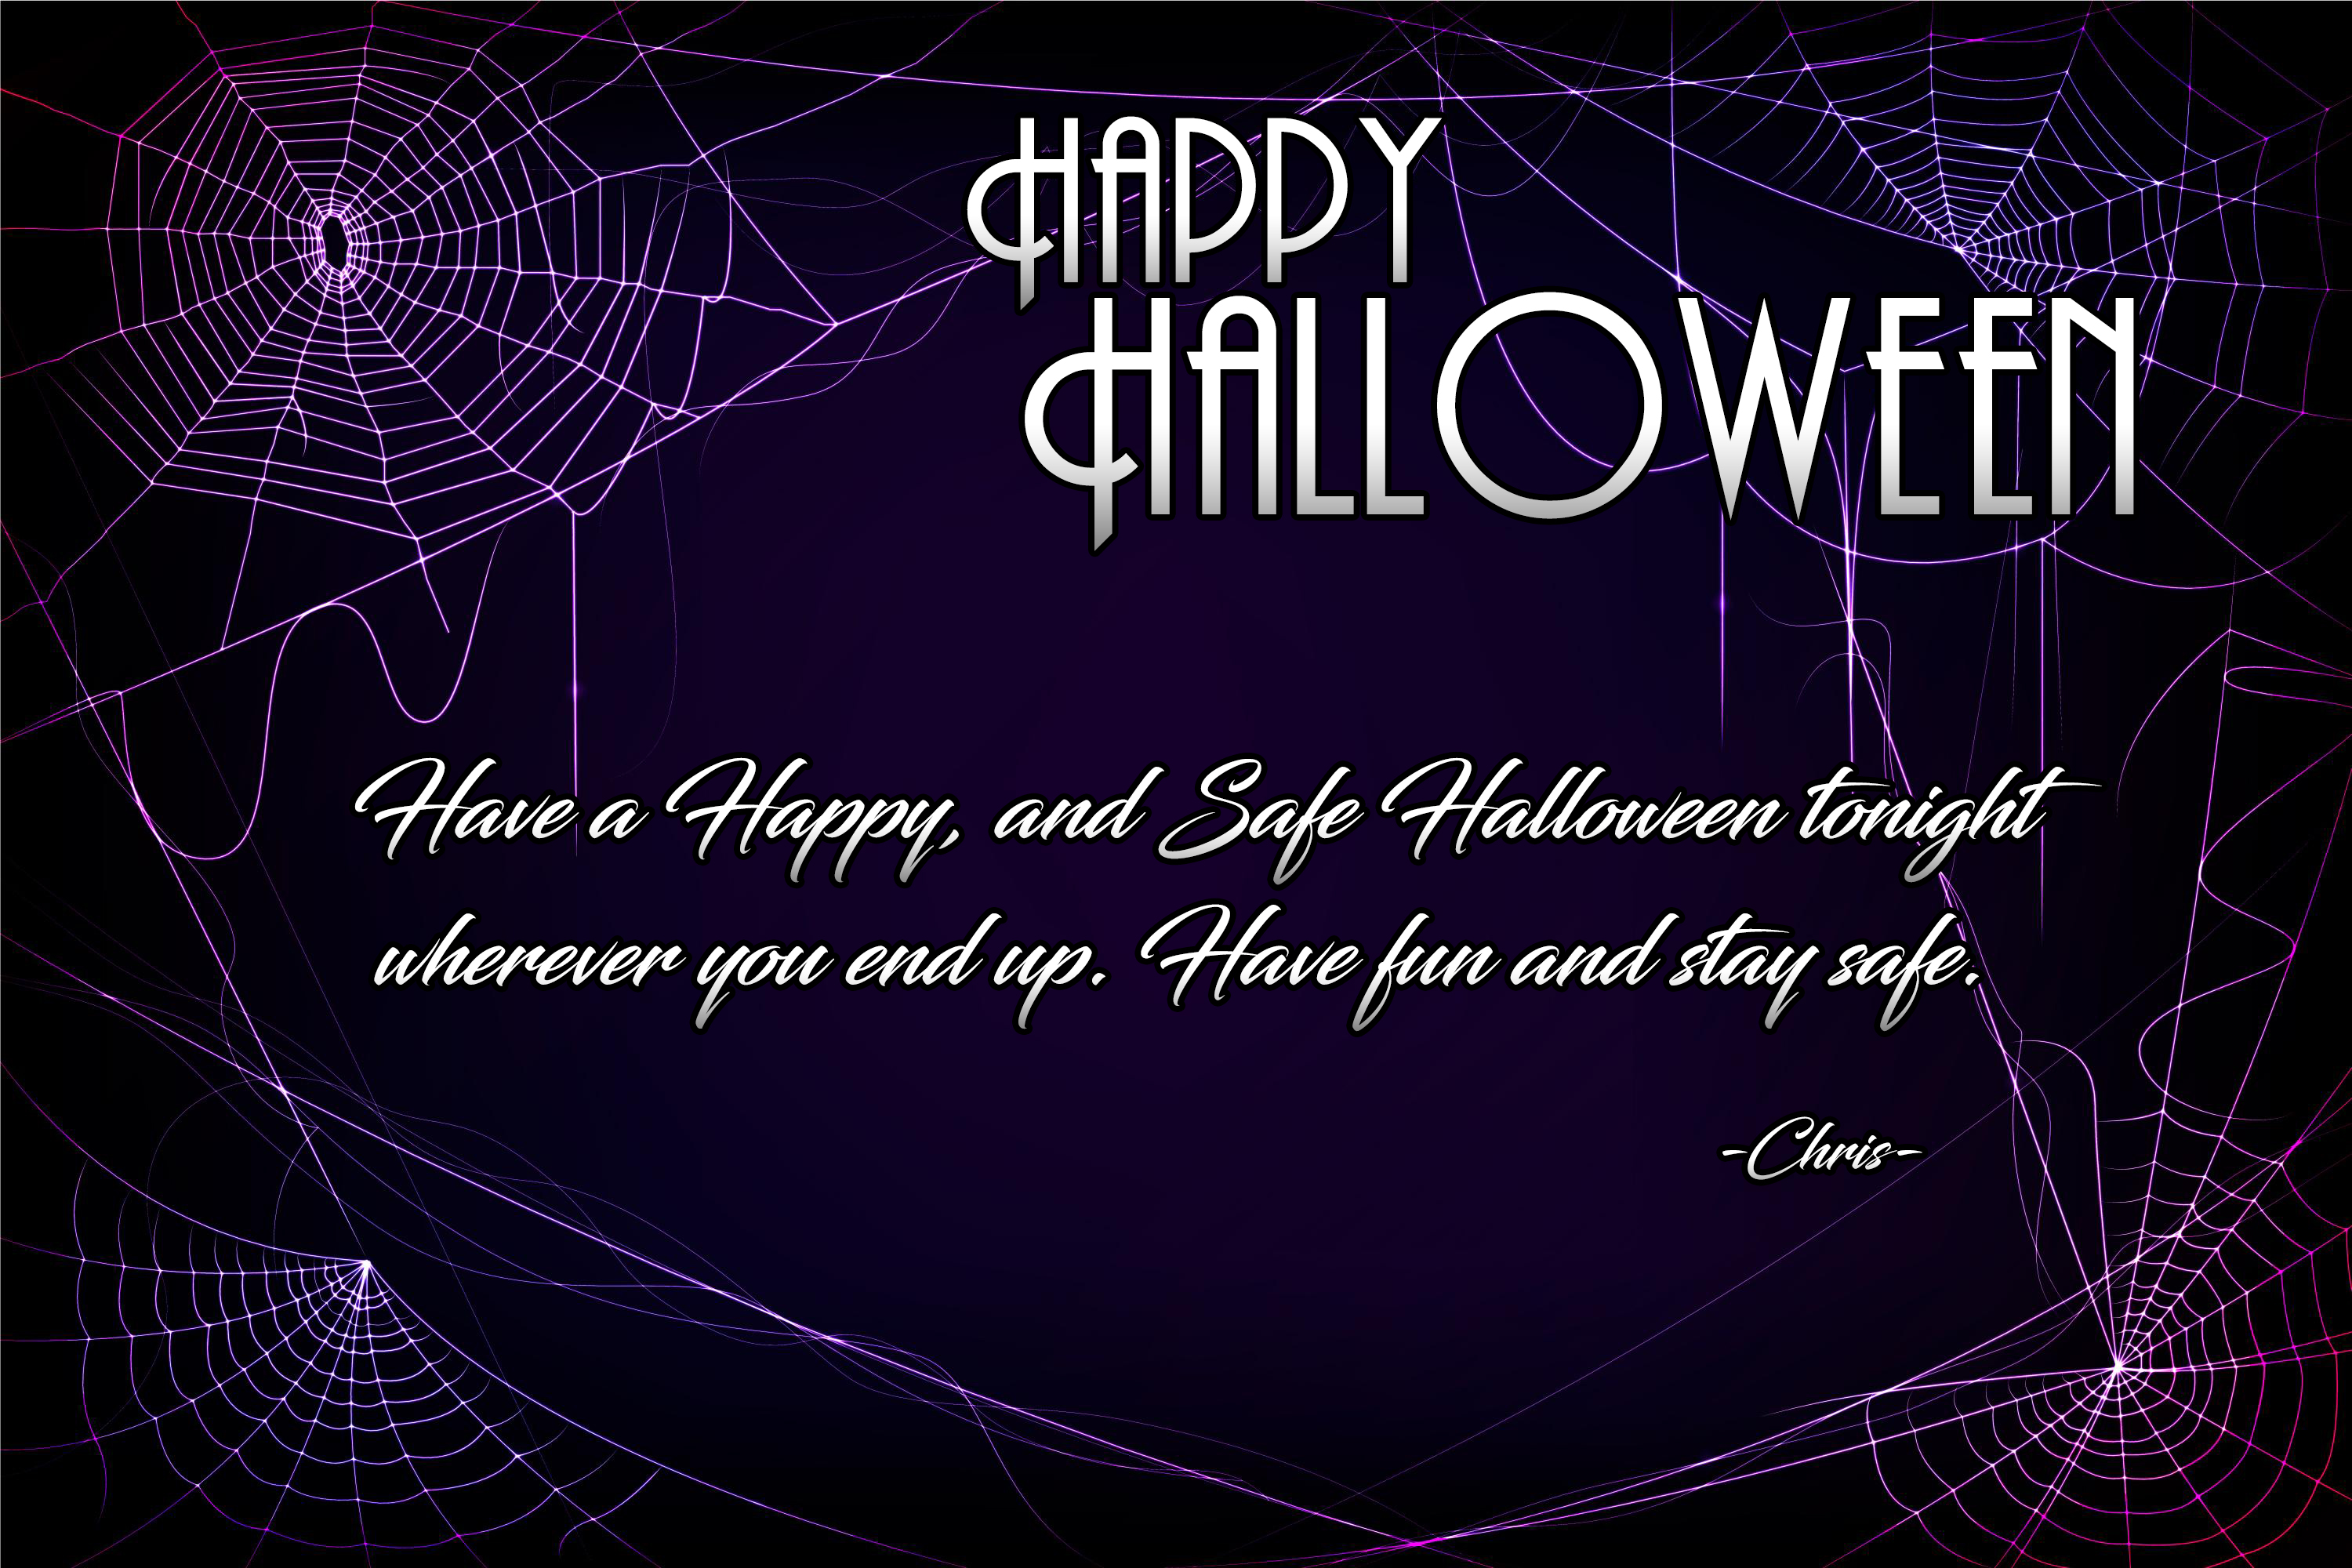 spider web - Happy Halloween Have a Happy, and Safe Halloween tonight wherever you end up. Have fun and stay safe. Chris